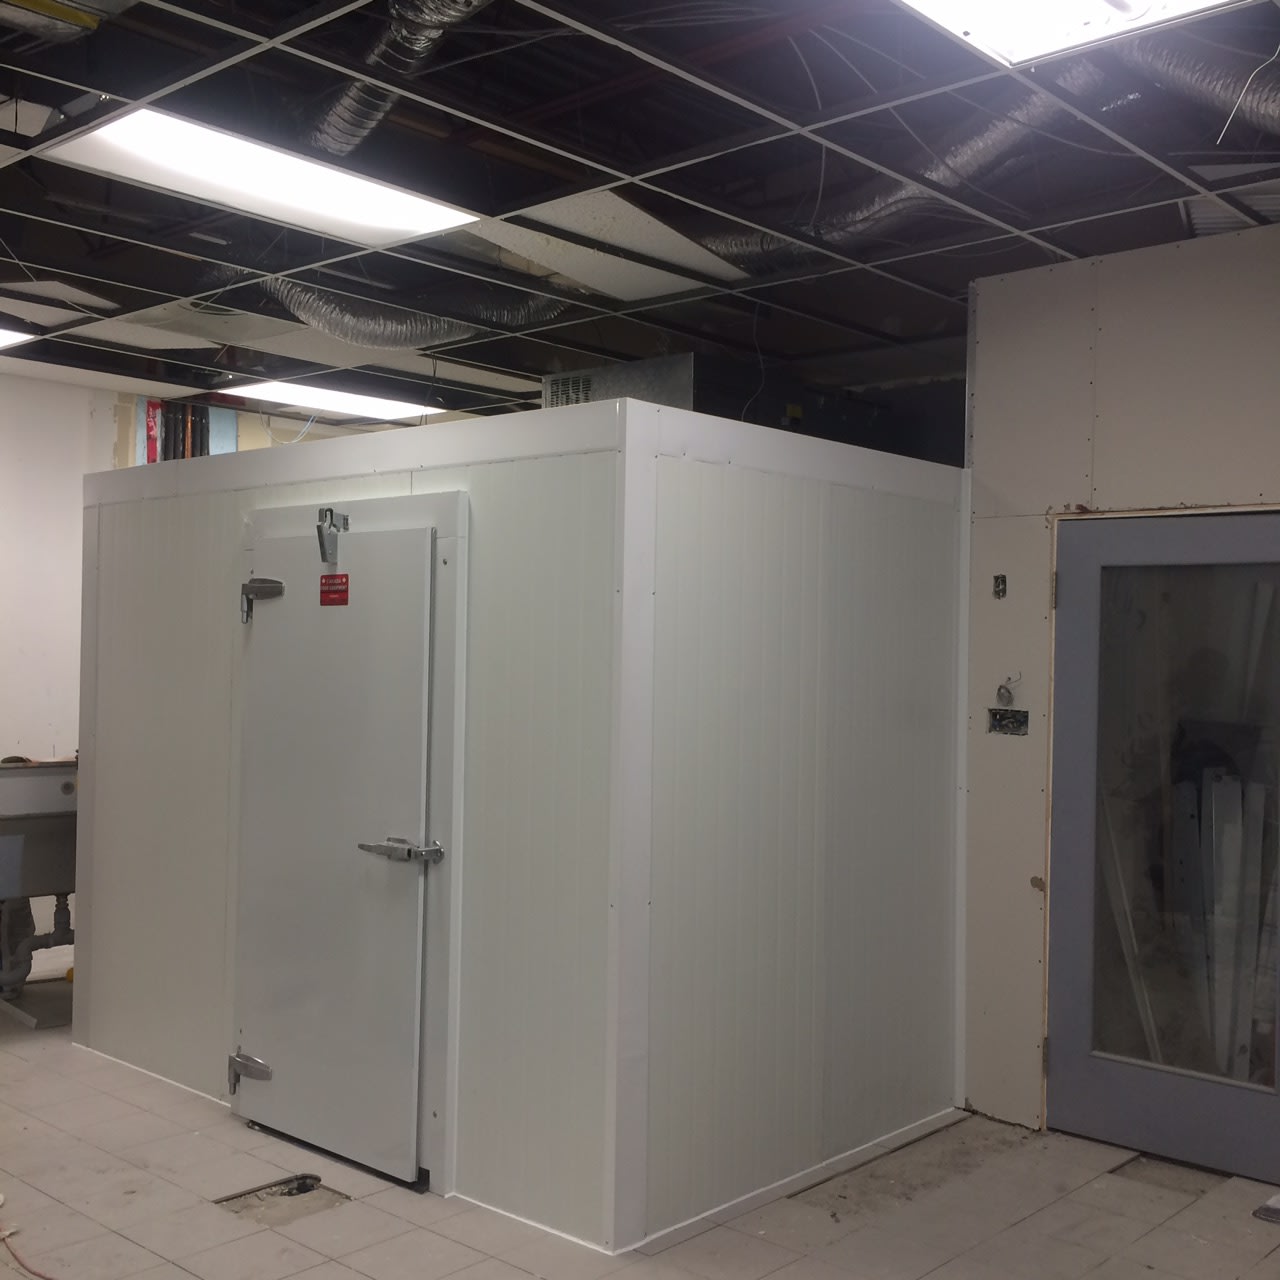 8x10x8H Walk-In Freezer - Used Self Contained System (NEW SD) - F8108SDUSC